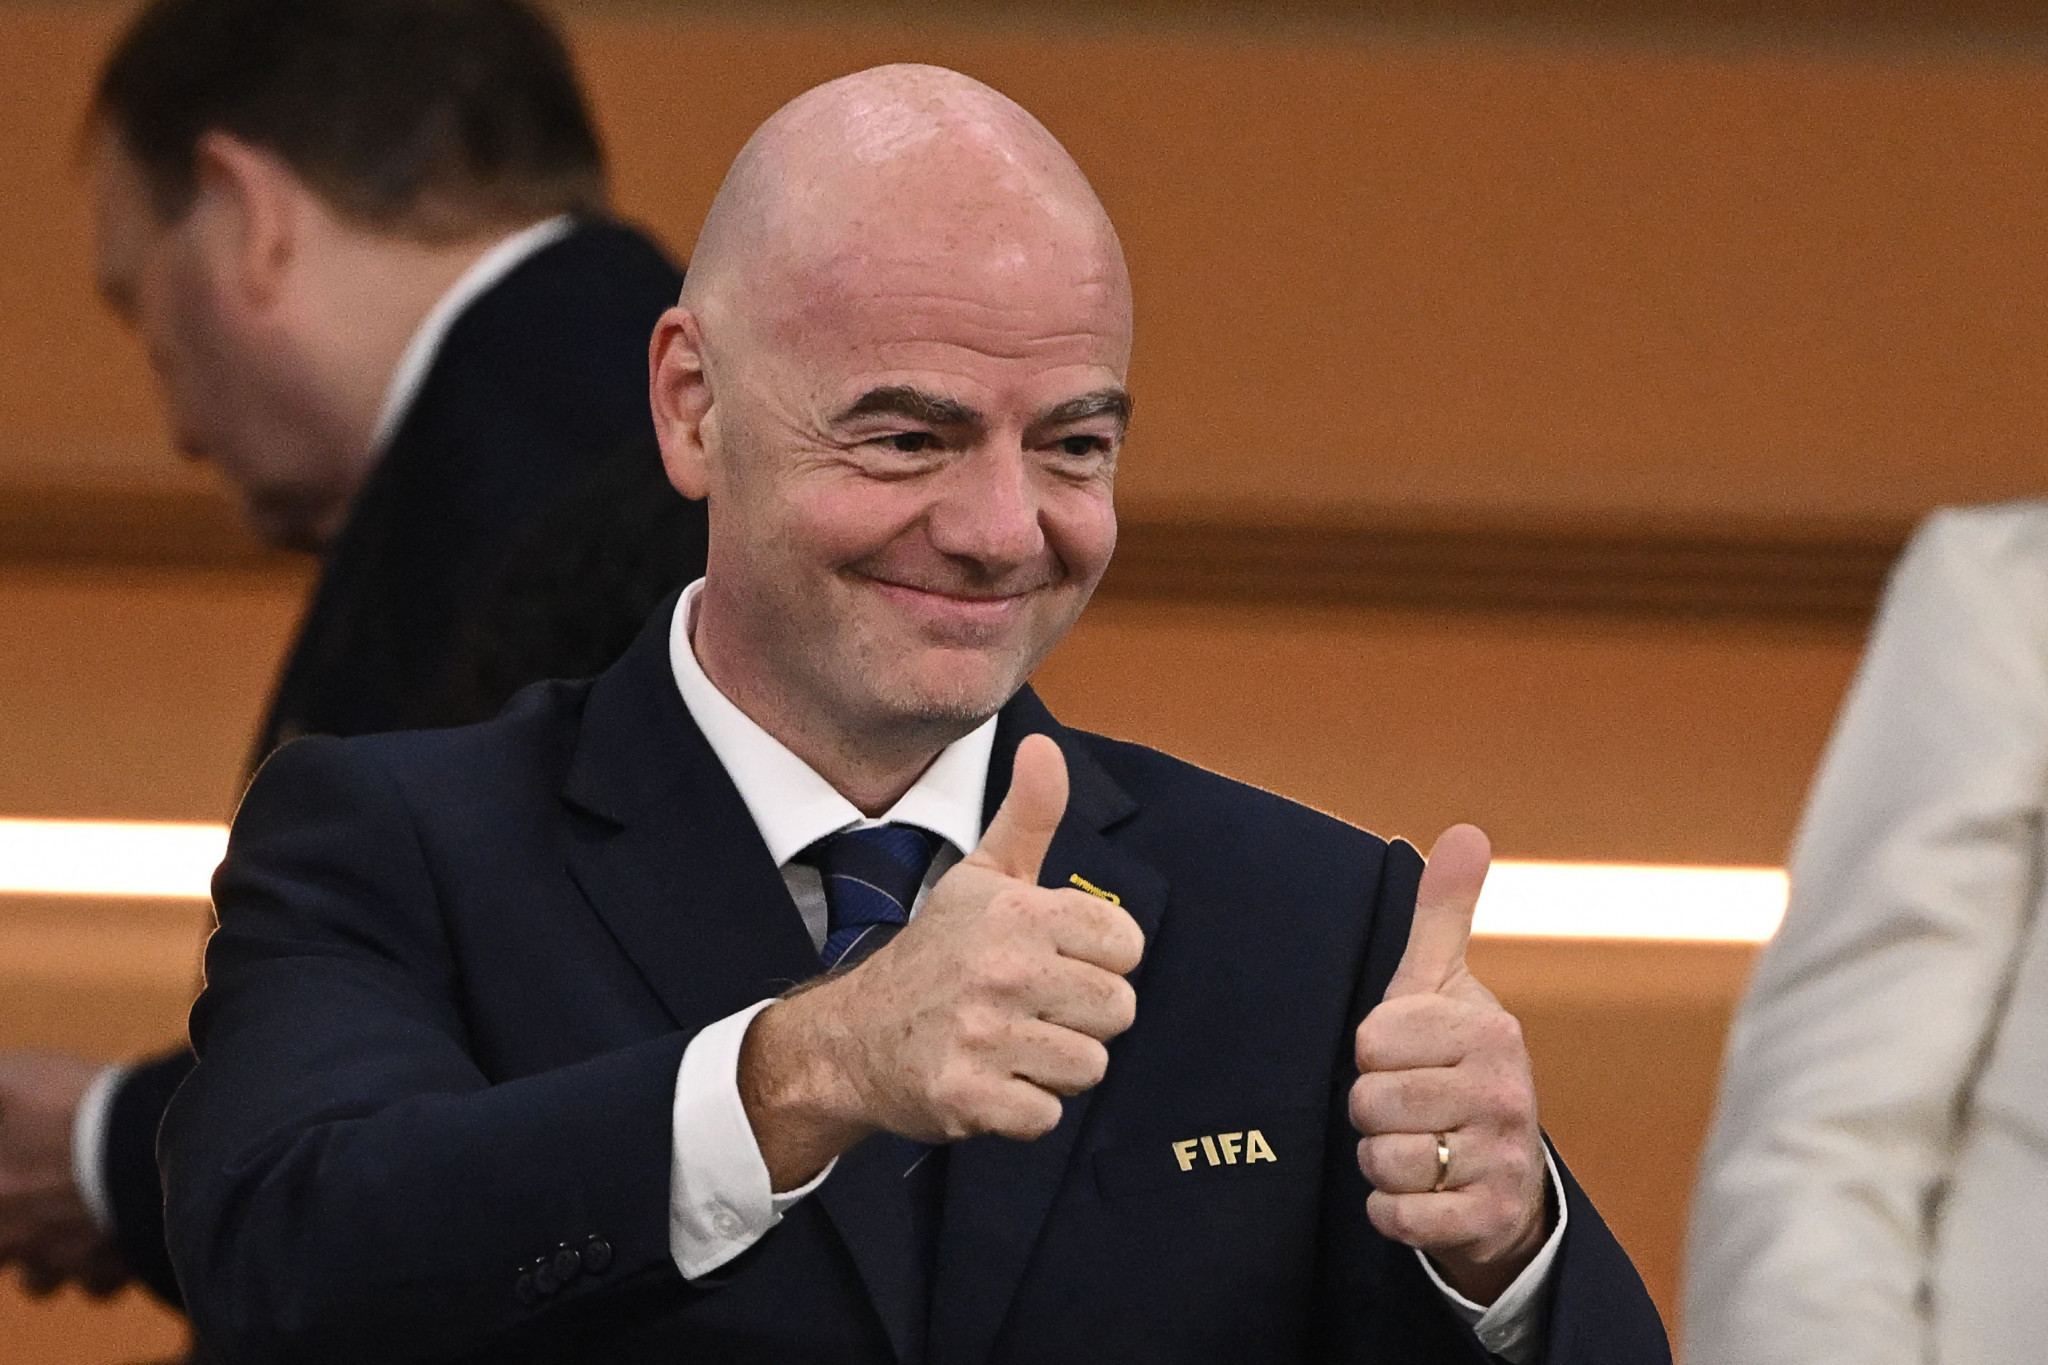 Infantino makes "best-ever" claim for Qatar 2022 World Cup group stage